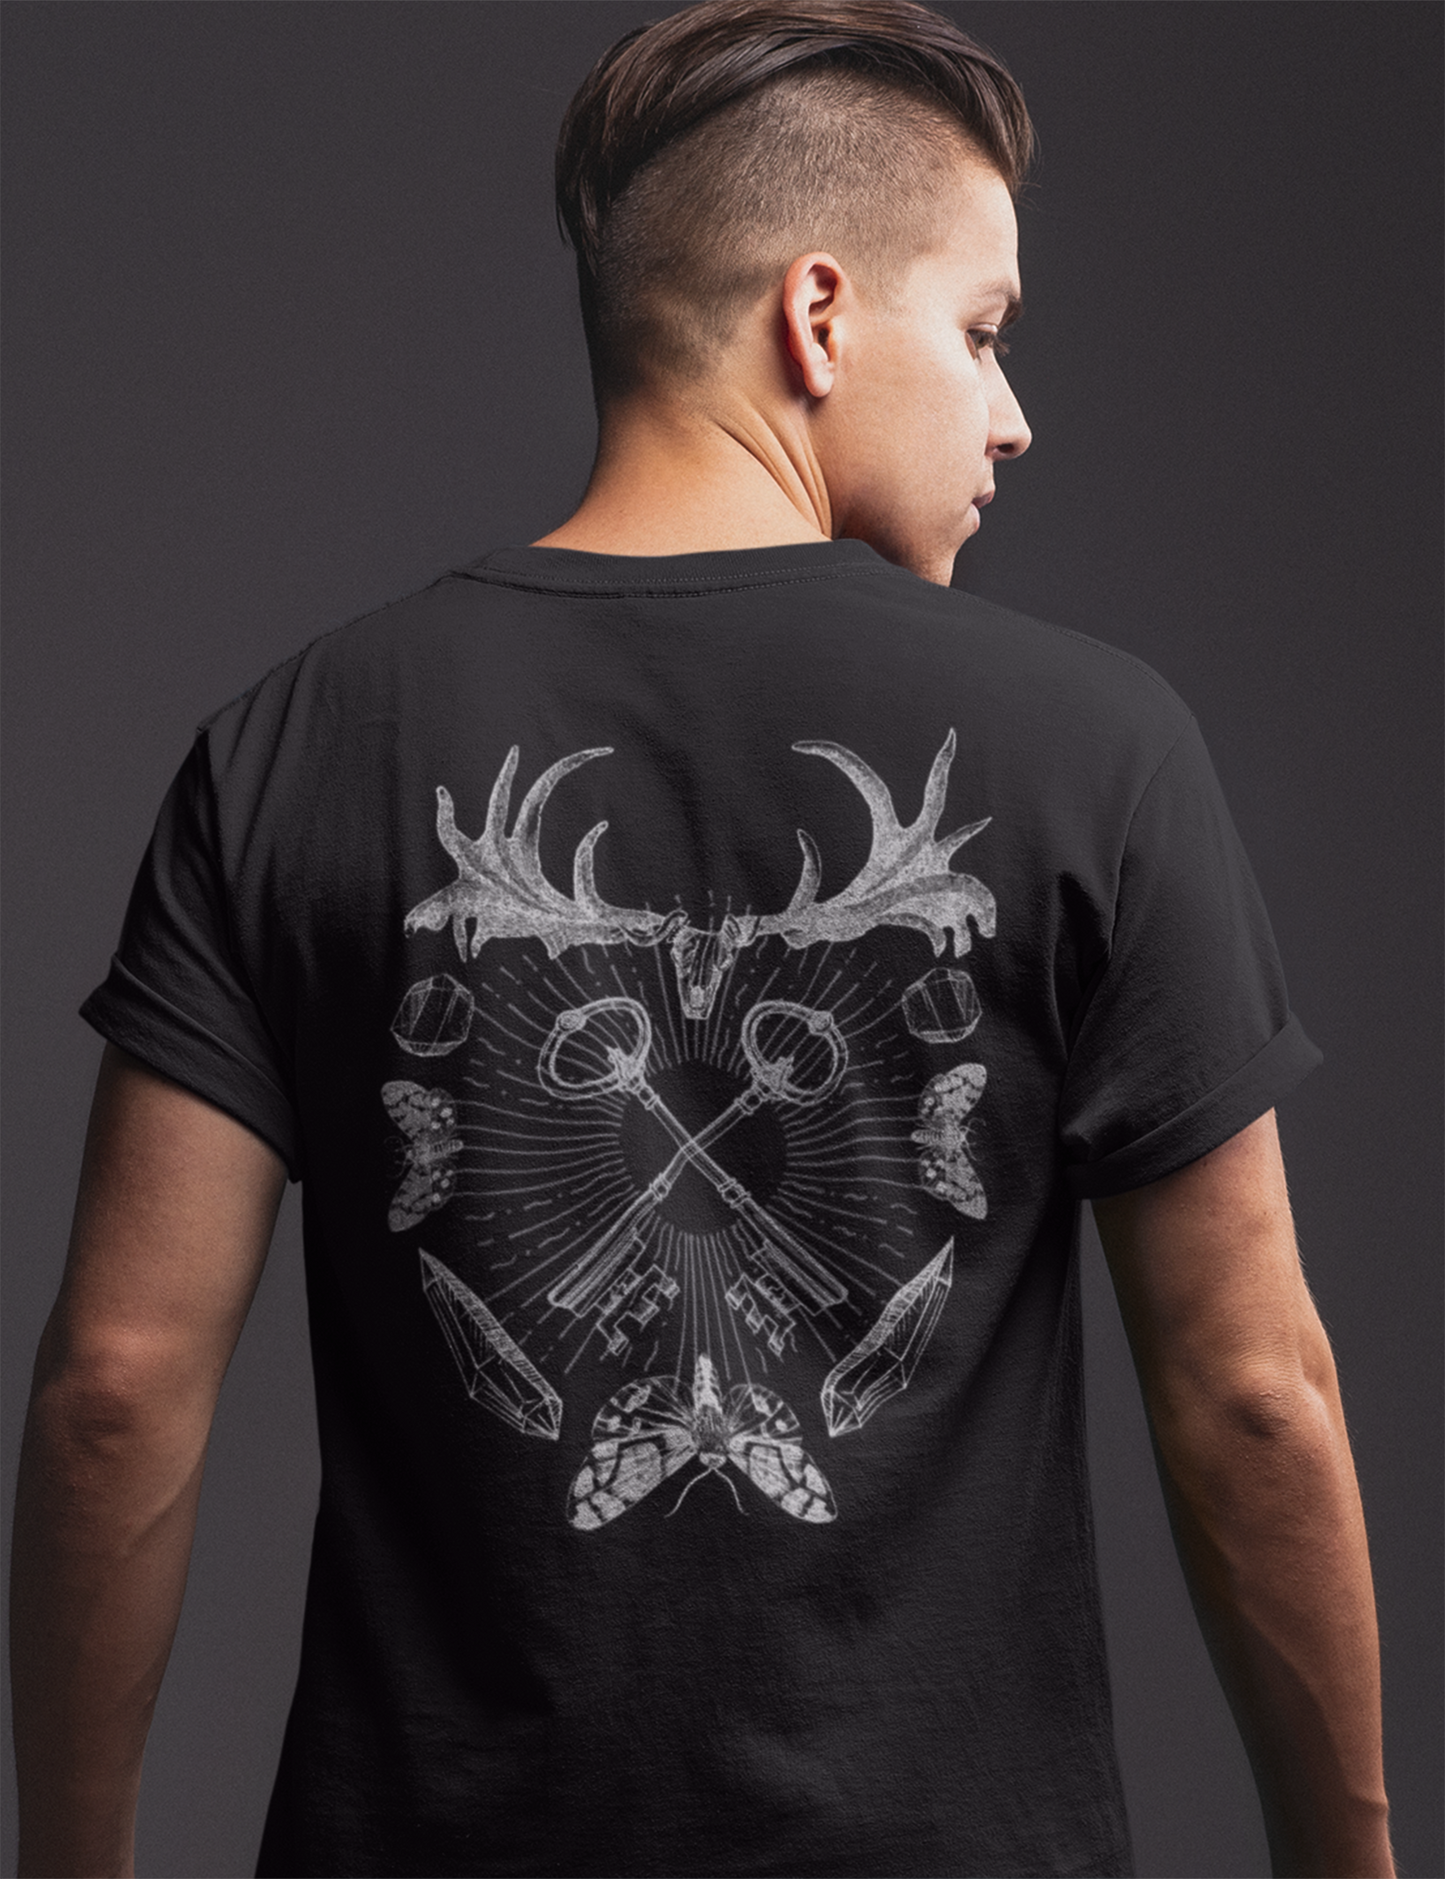 Mystical Antlers Witchy Art Esoteric Occult Plus Size Clothing Shirt